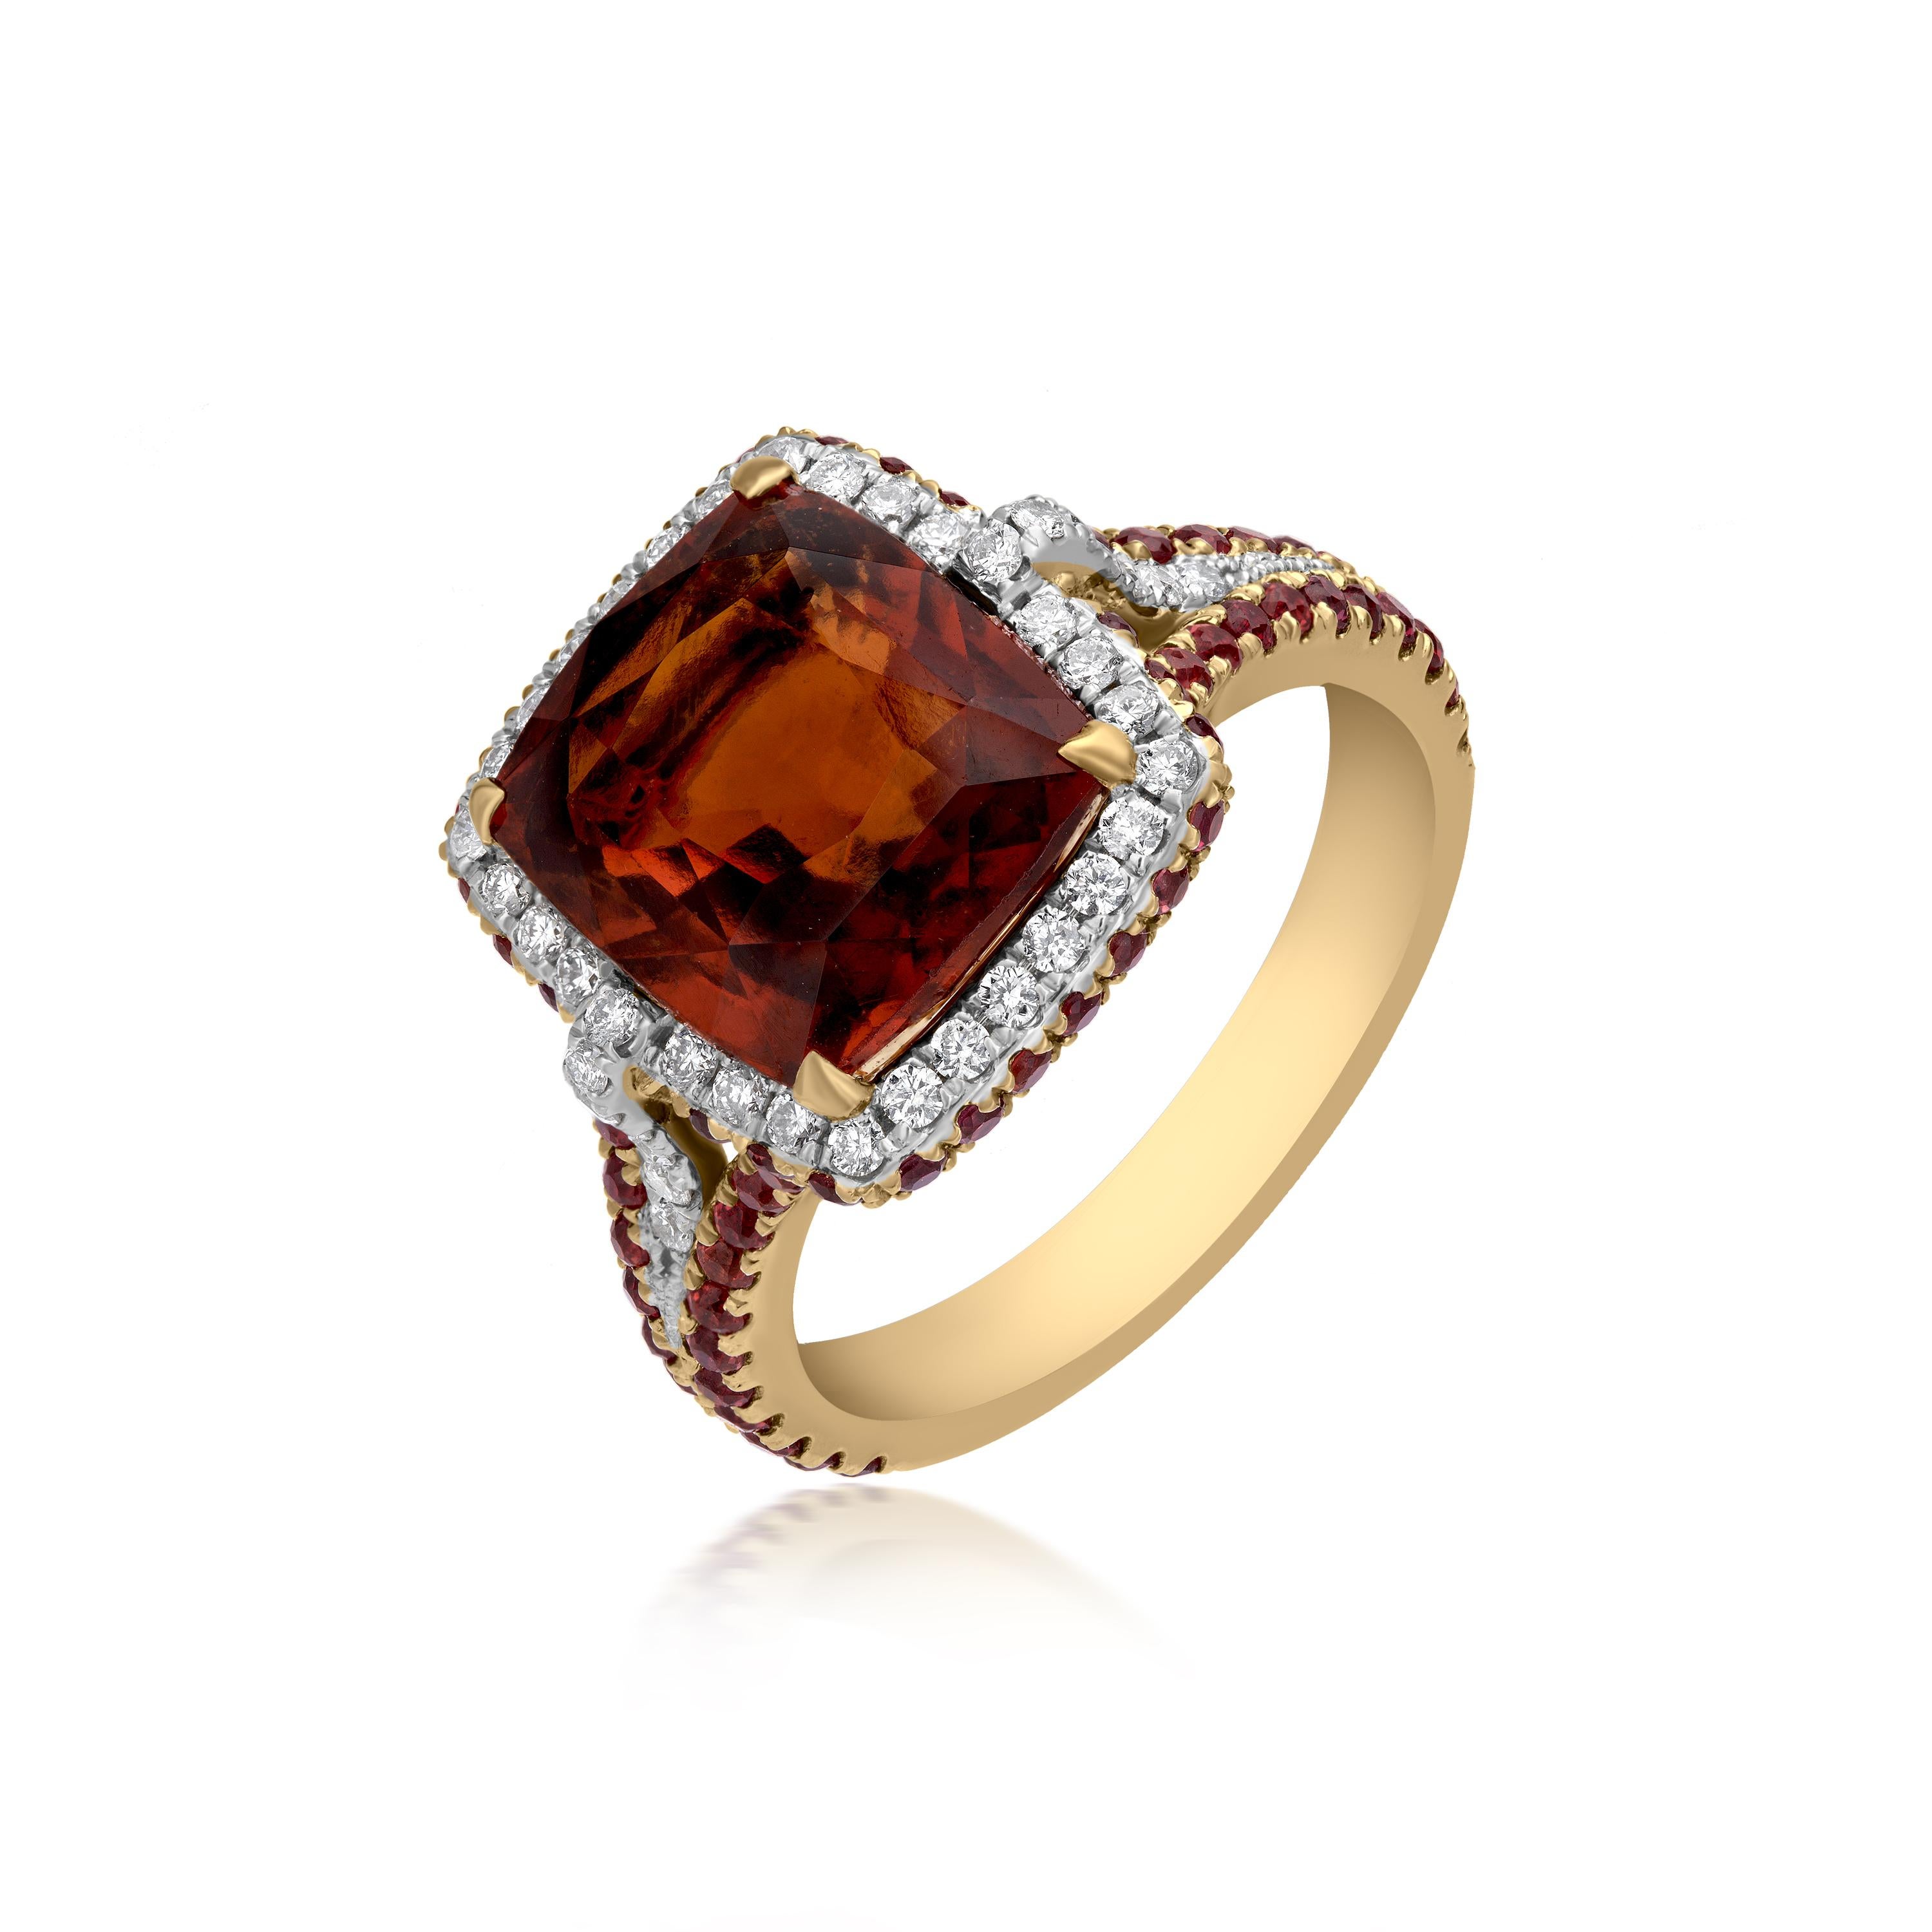 One cushion-shaped brownish-red Hessonite Garnet is enhanced by 42 round brilliant-cut White Diamonds set in a micro pave setting and 70 round-cut Orange Sapphire gemstones put in prong settings, which adds to the gemstone's amazing flair. The 0.33